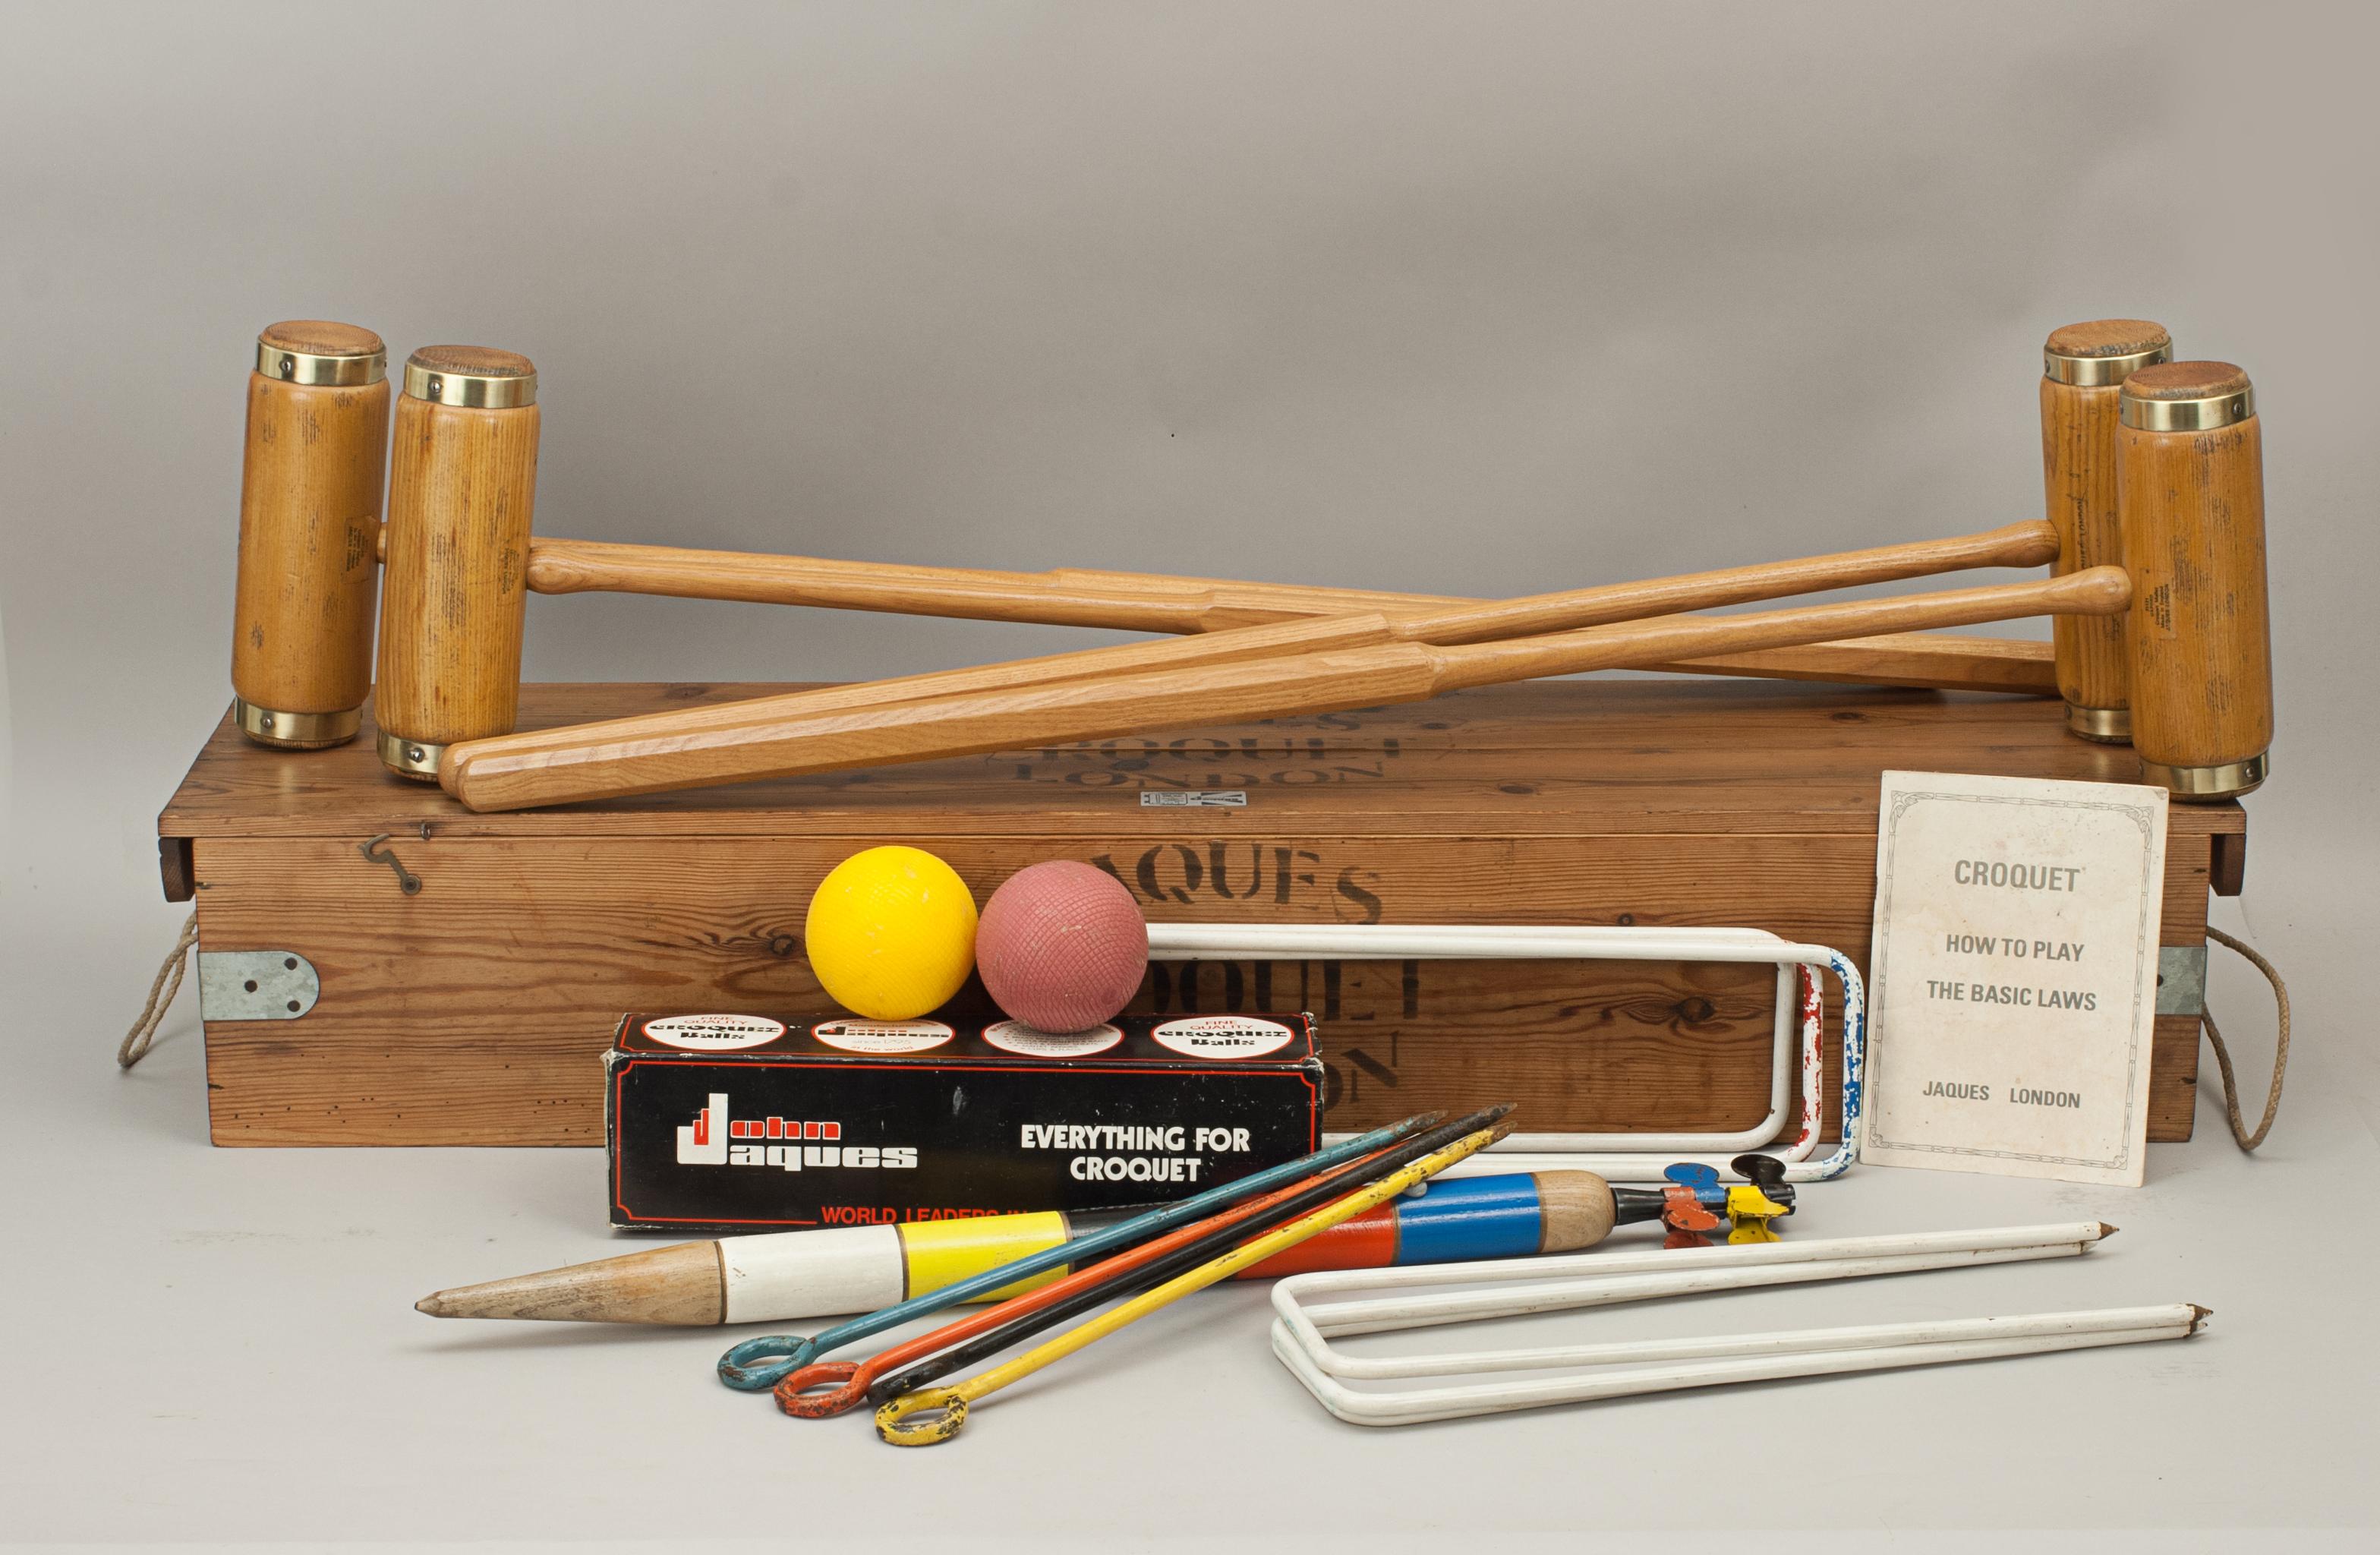 Jaques 'Oxford' Croquet set.
A Jaques garden croquet set in original pine box with four brass bound ash mallets. To complete the set there are four coloured balls in the standard croquet colors, six bent metal hoops, four sprung clips, four colored